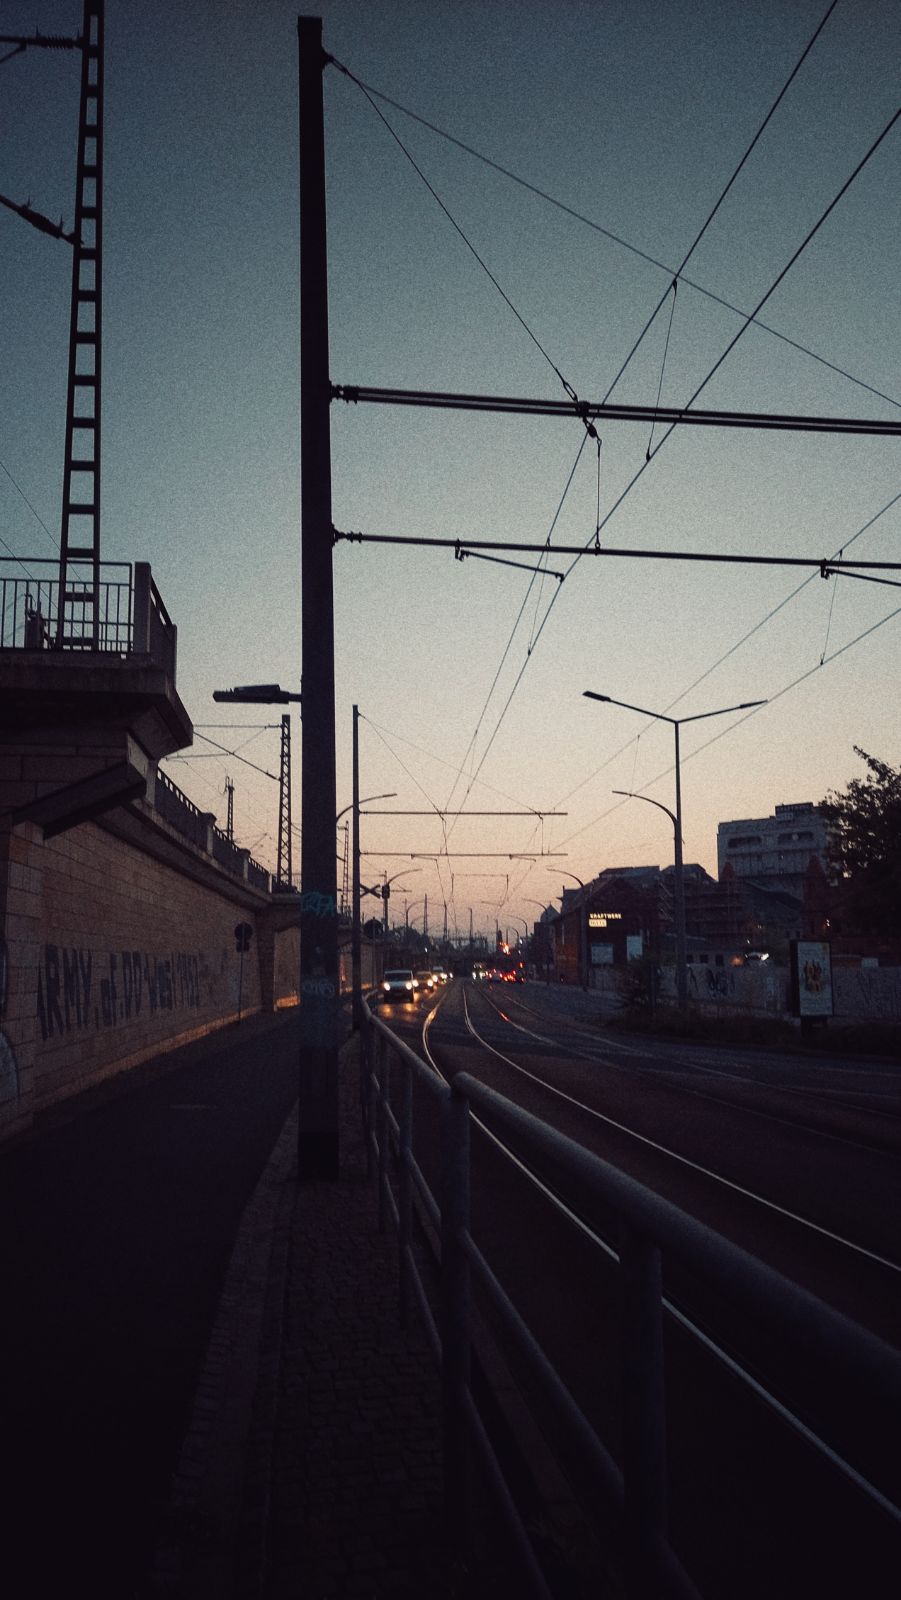 An early morning street scene. Tramway rails in front, between sidewalk and road. Some cars headlights approaching. Distant sunrise.